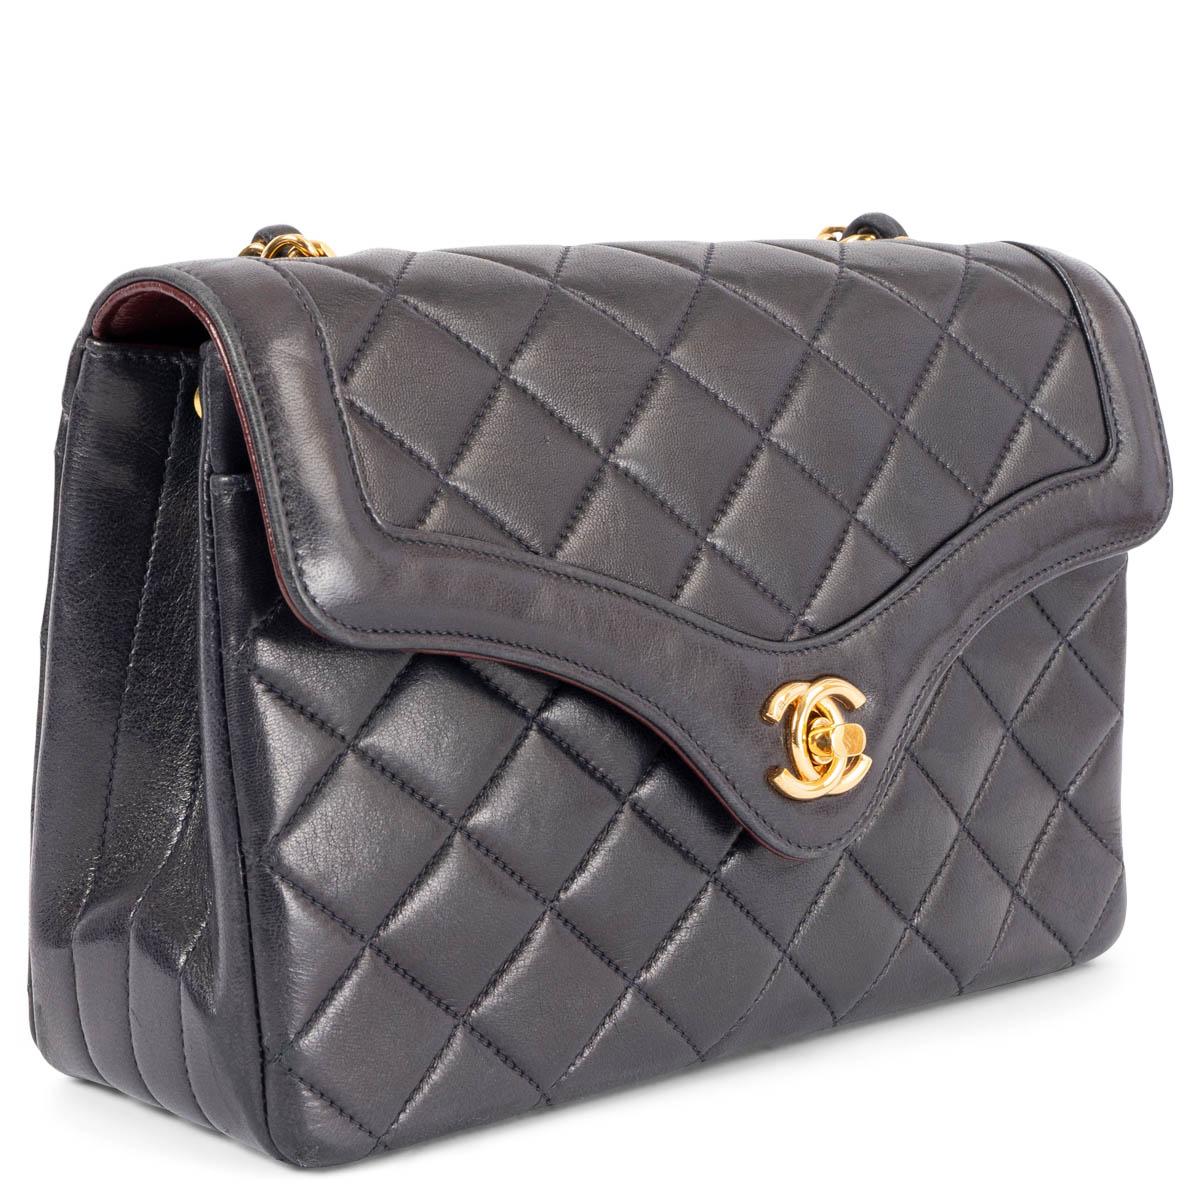 100% authentic Chanel Vintage quilted CC turn-lock flap bag in midnight blue lambskin with gold-tone hardware. Lined in burgundy leather with one zipper pocket, two slit pockets and one lipstick pocket in the middle. Has been carried and shows some